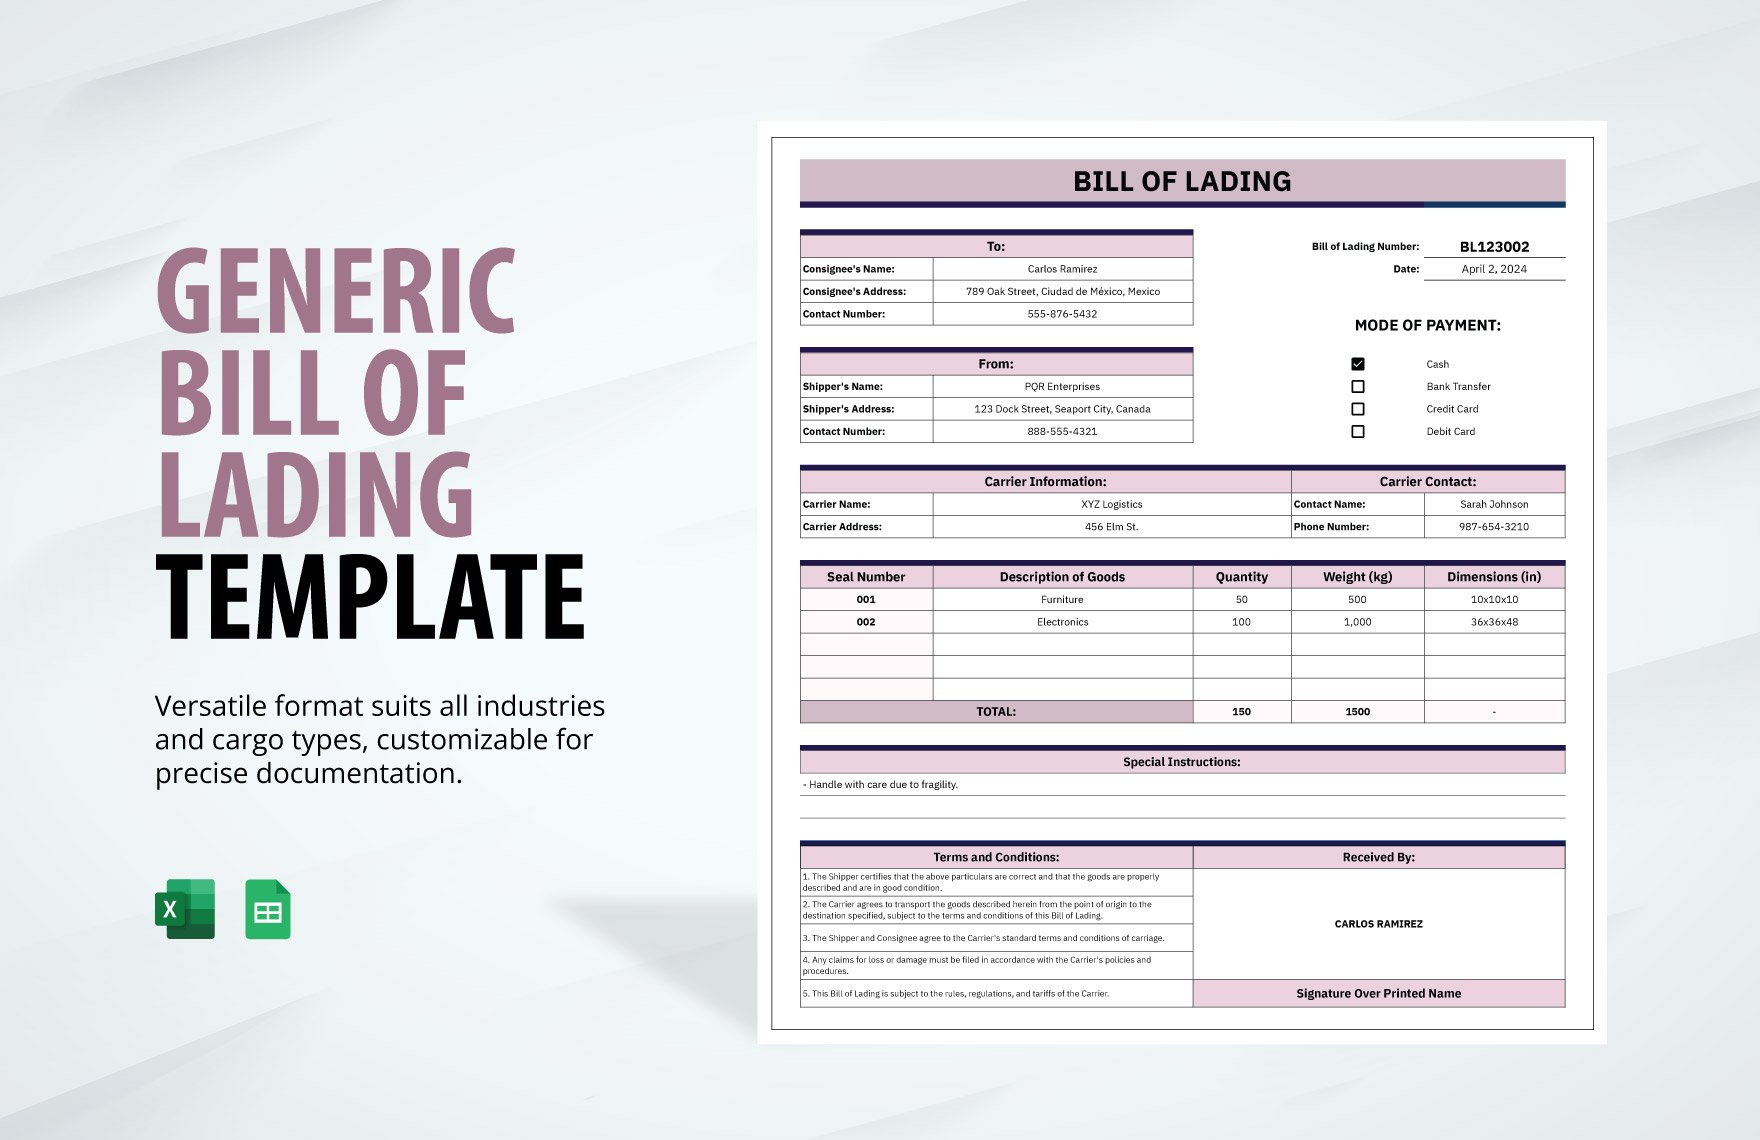 Generic Bill of Lading Template